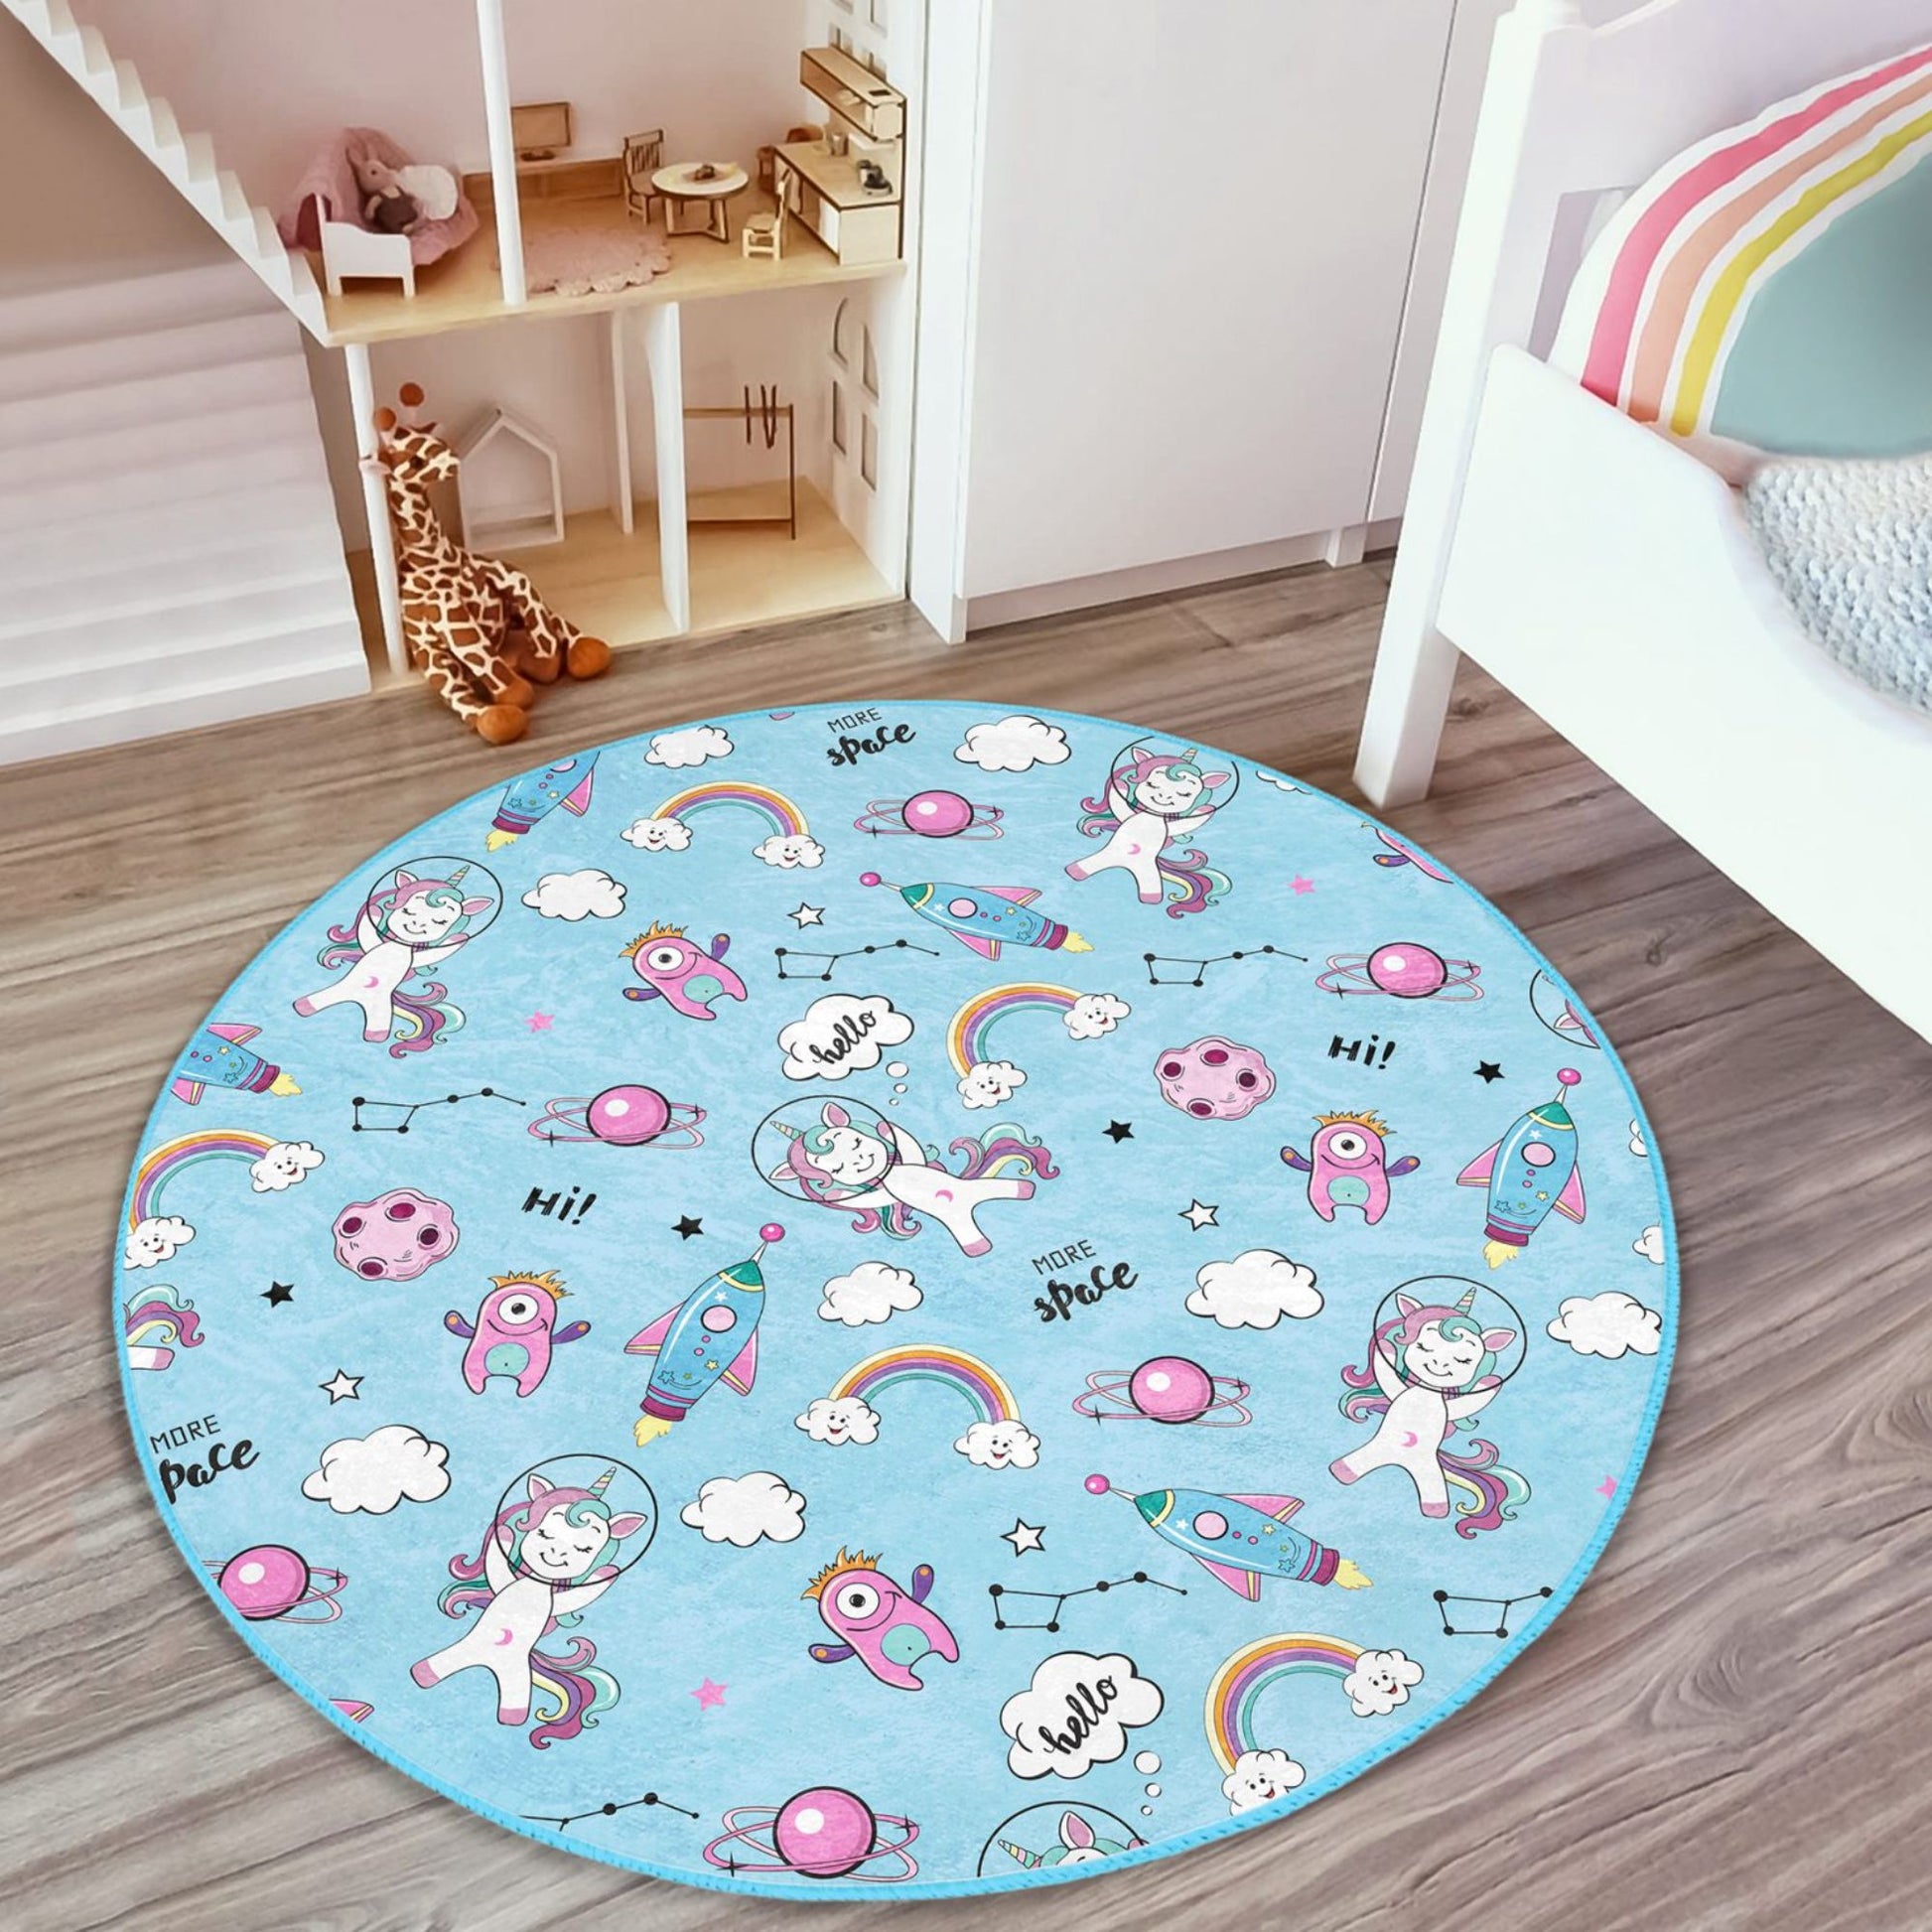 Galactic Unicorn and Astronaut Design Rug - Ideal for Play Areas